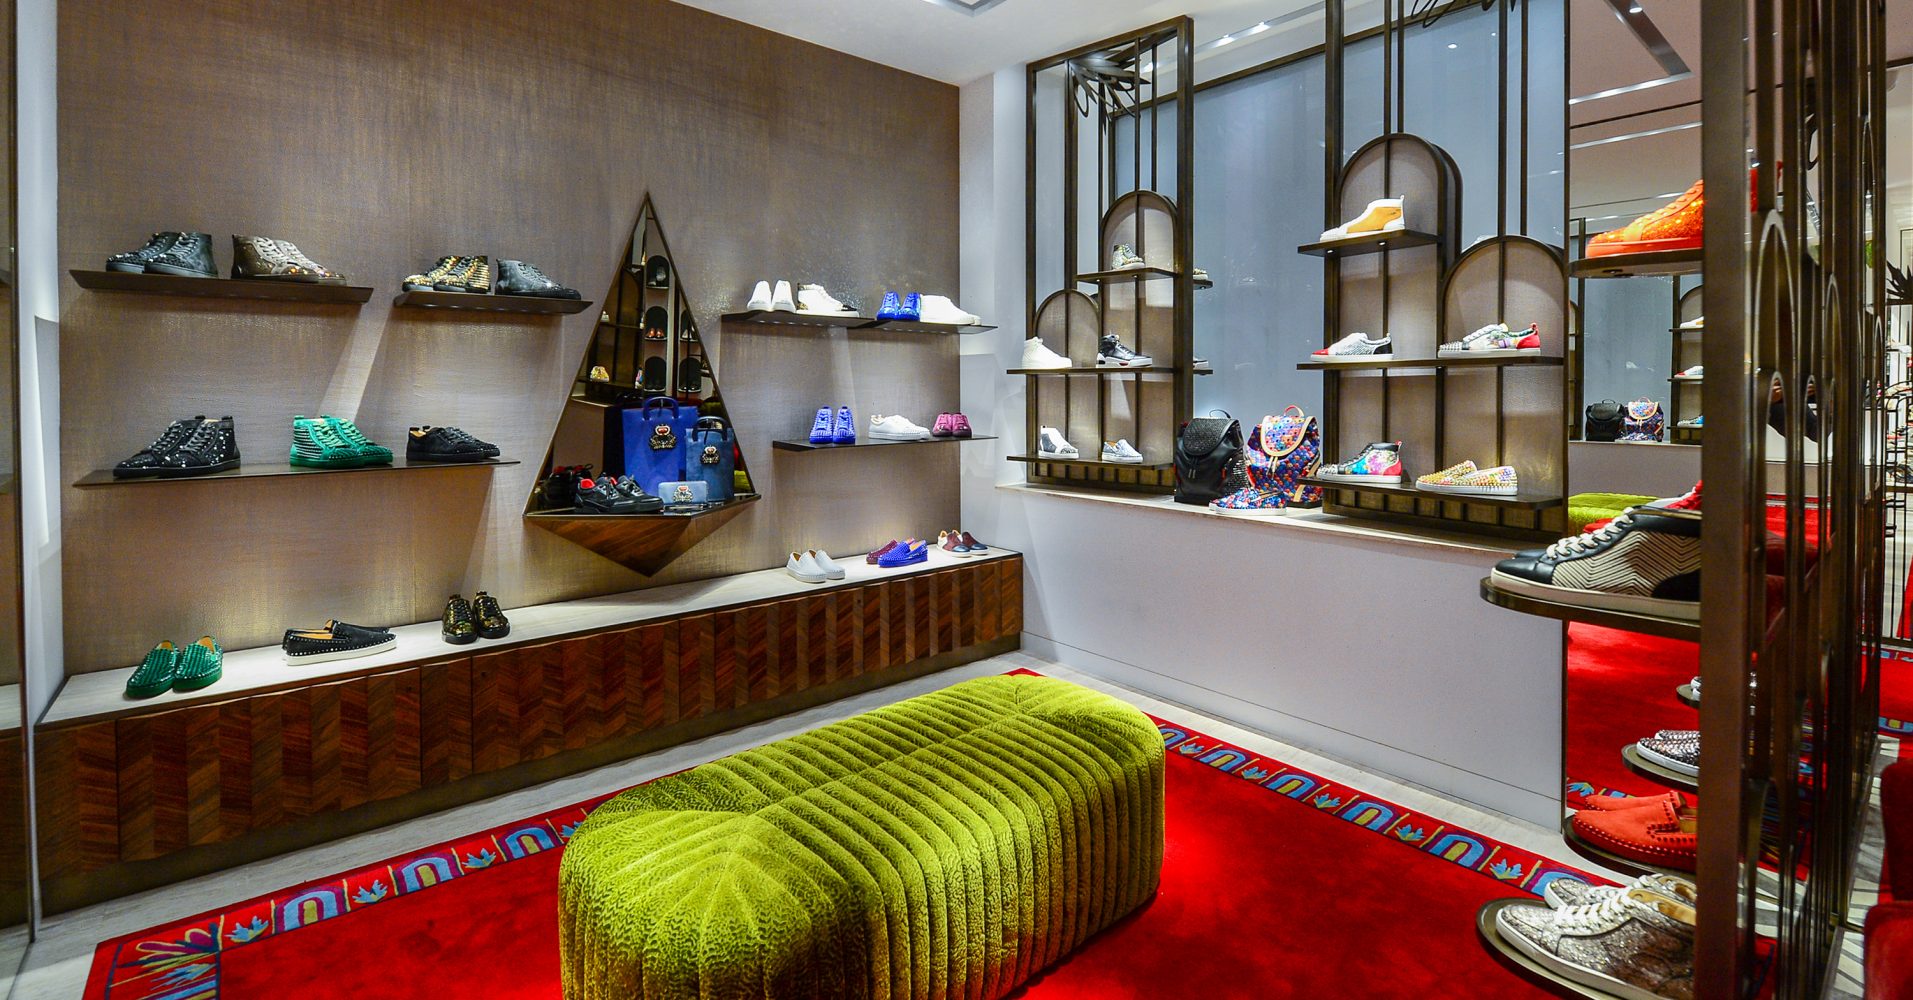 Seating area and shoe display found at Christian Louboutin concession, retail experience design, designed by Household.